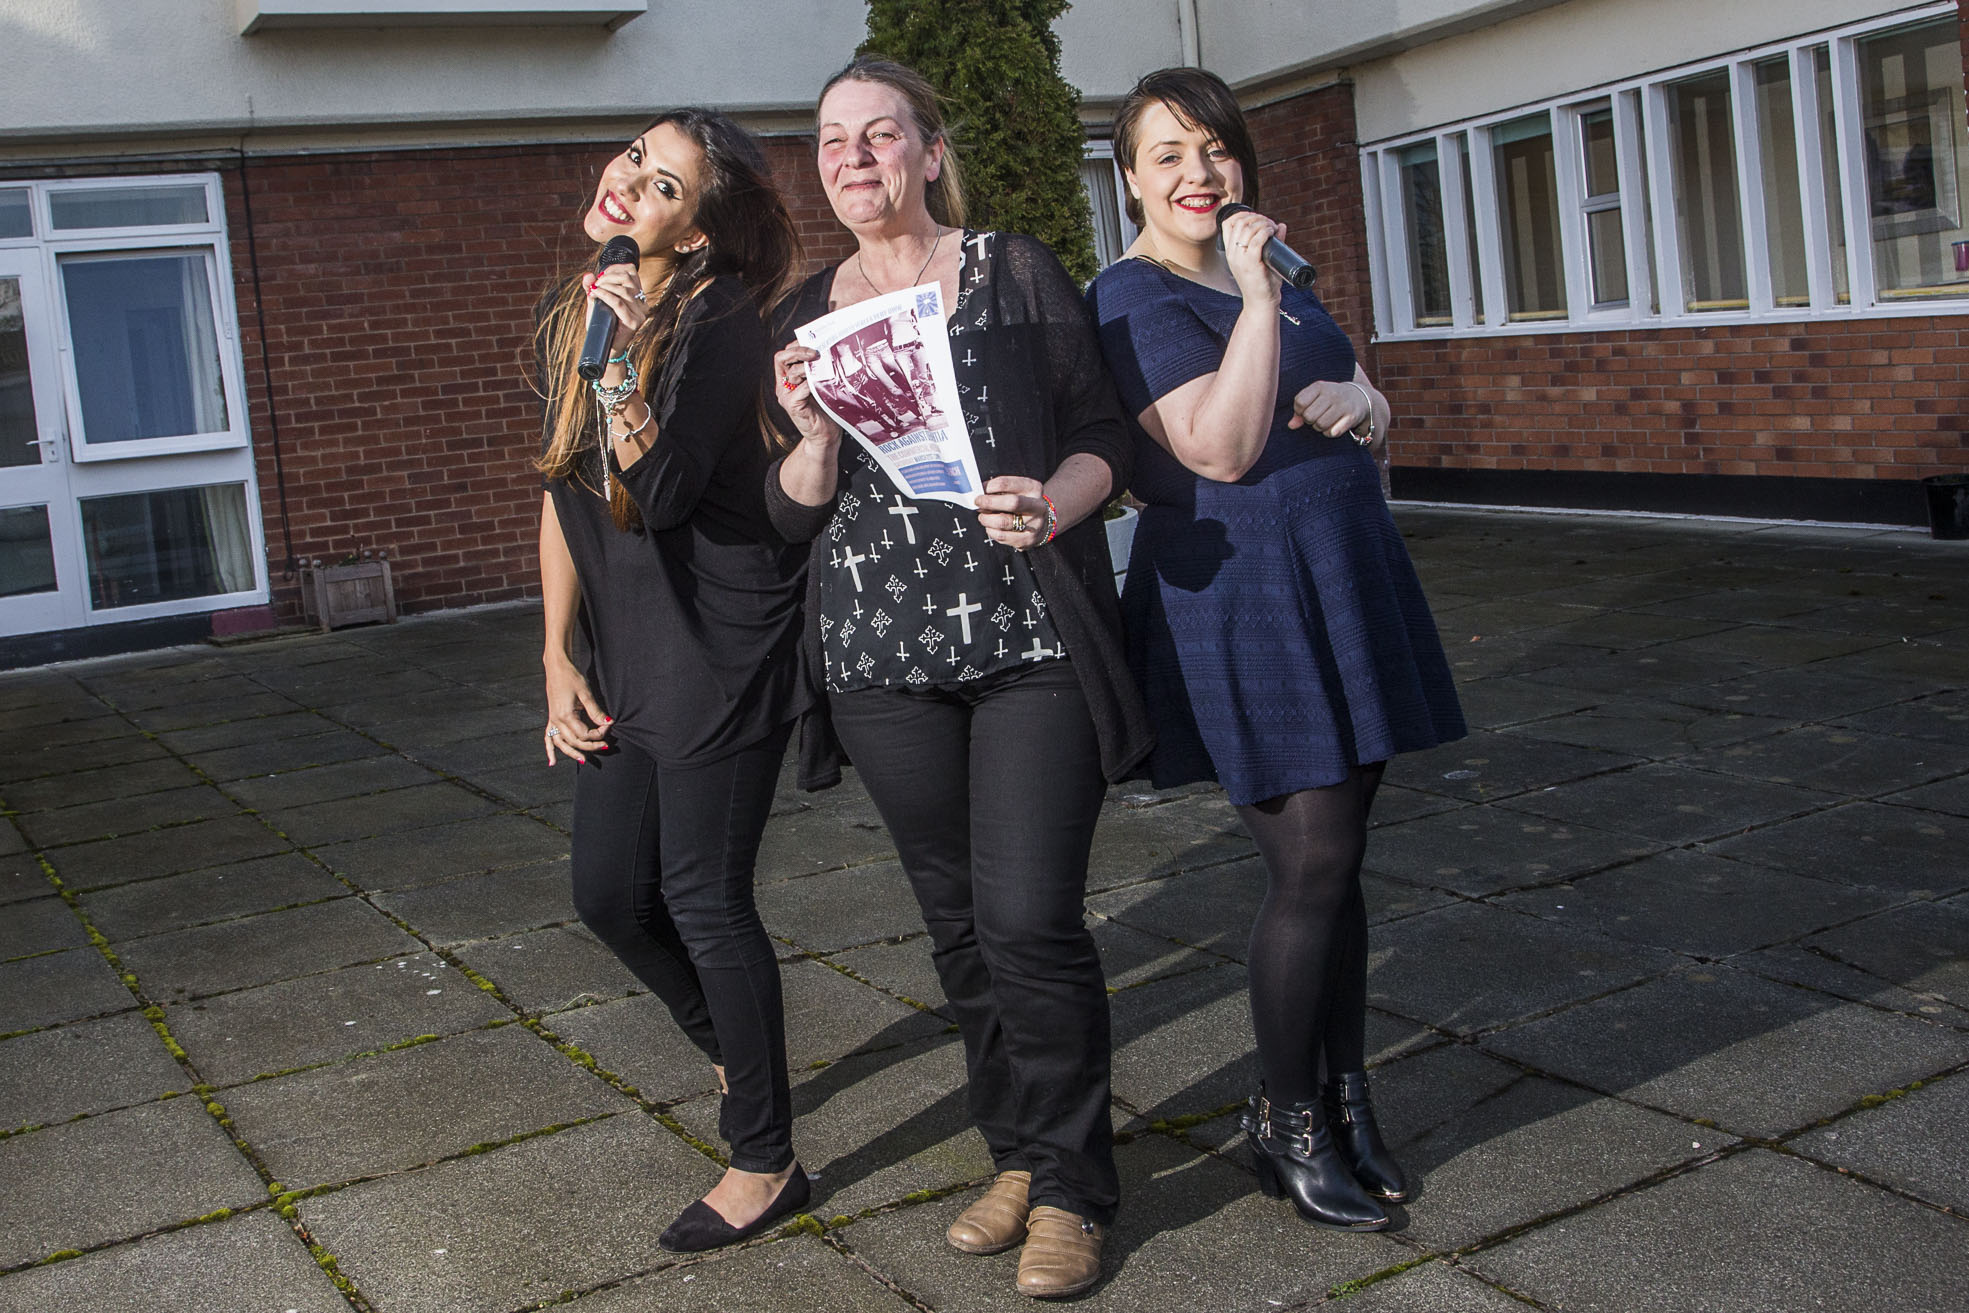 Care home staff to rock against dementia